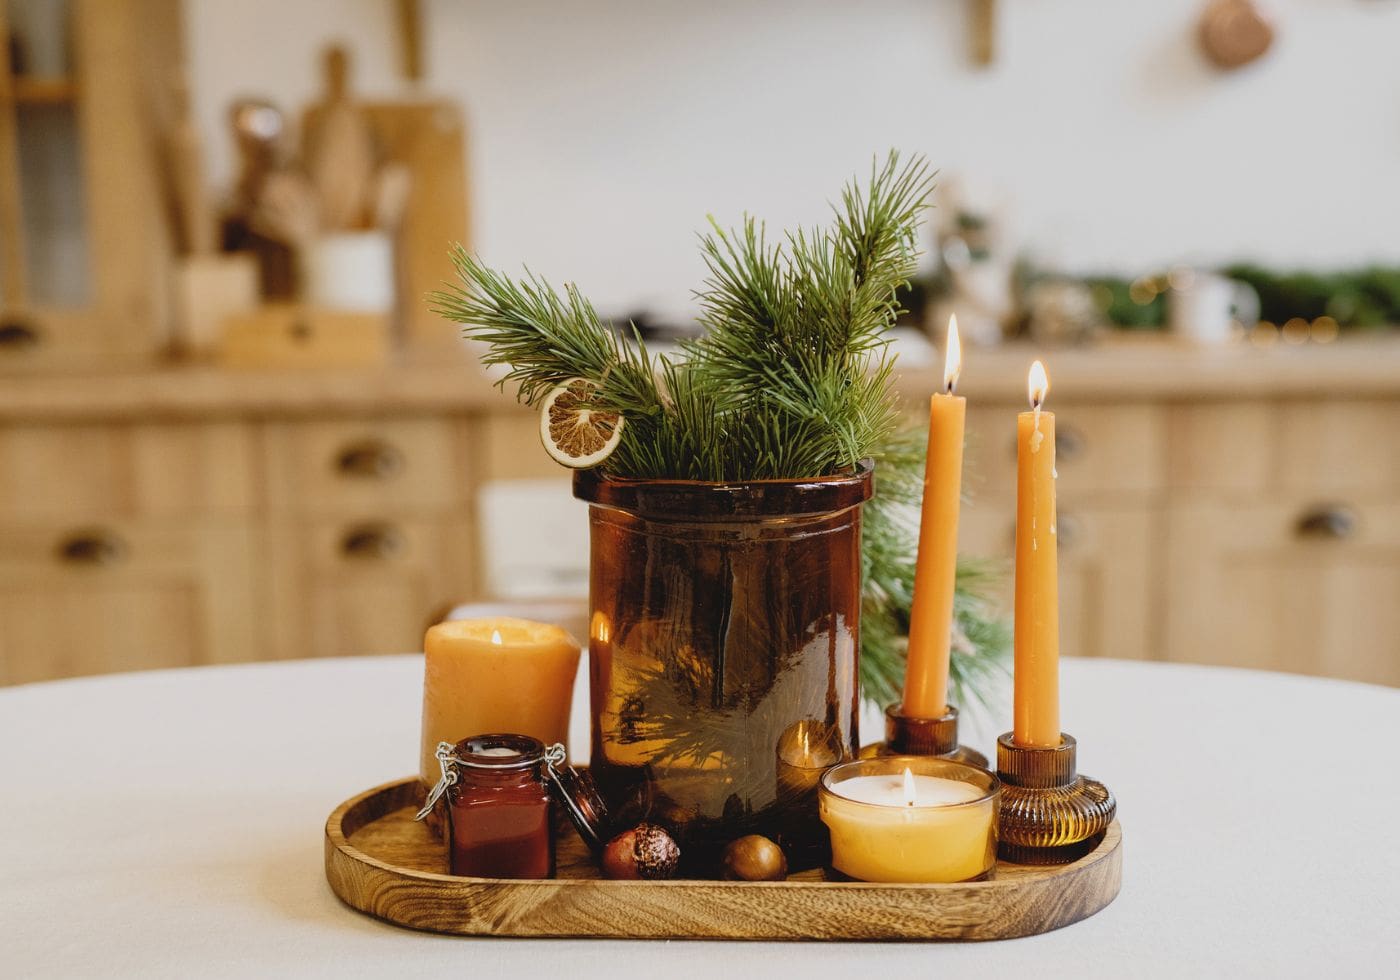 Shop the Most Festive Holiday Home Decor